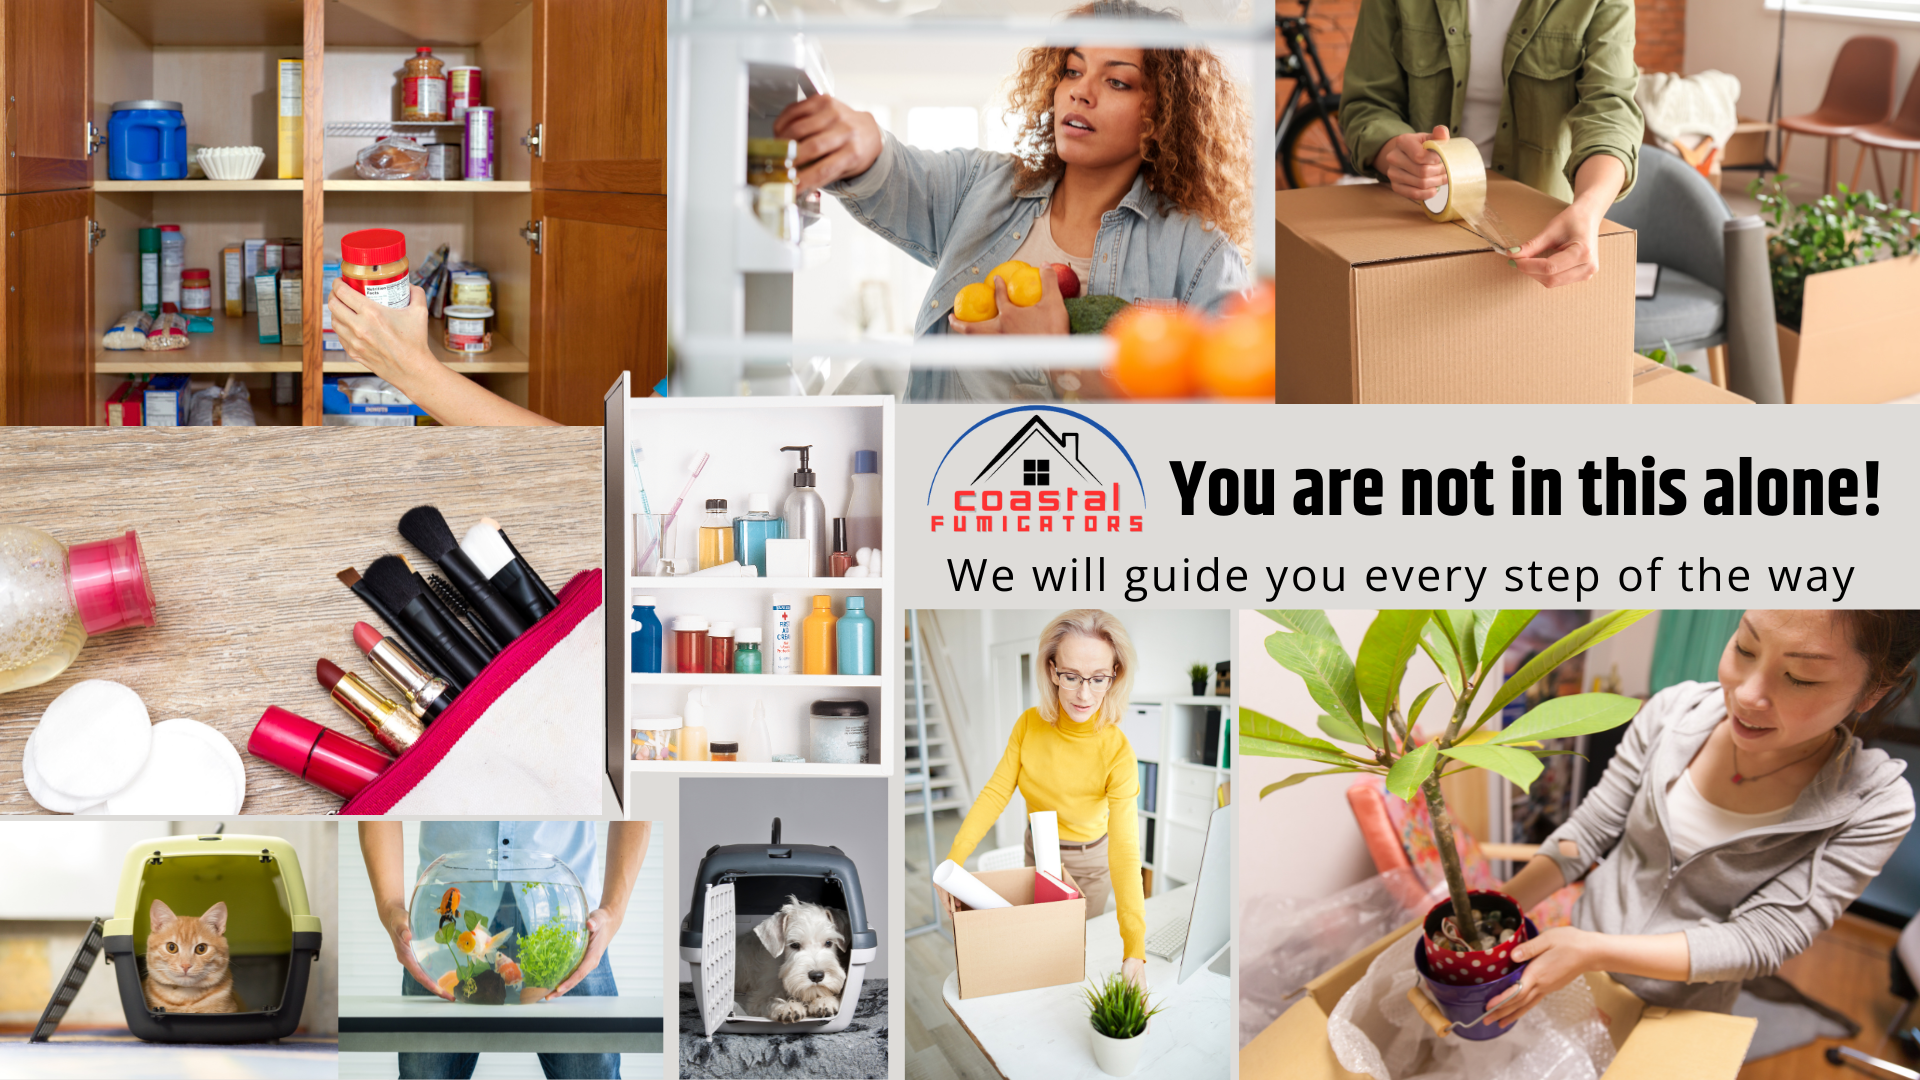 A collage of images show all the things you must remove when you have your home fumigated for drywood termites or powderpost beetles. They include makeup, food, pets, plants, etc.